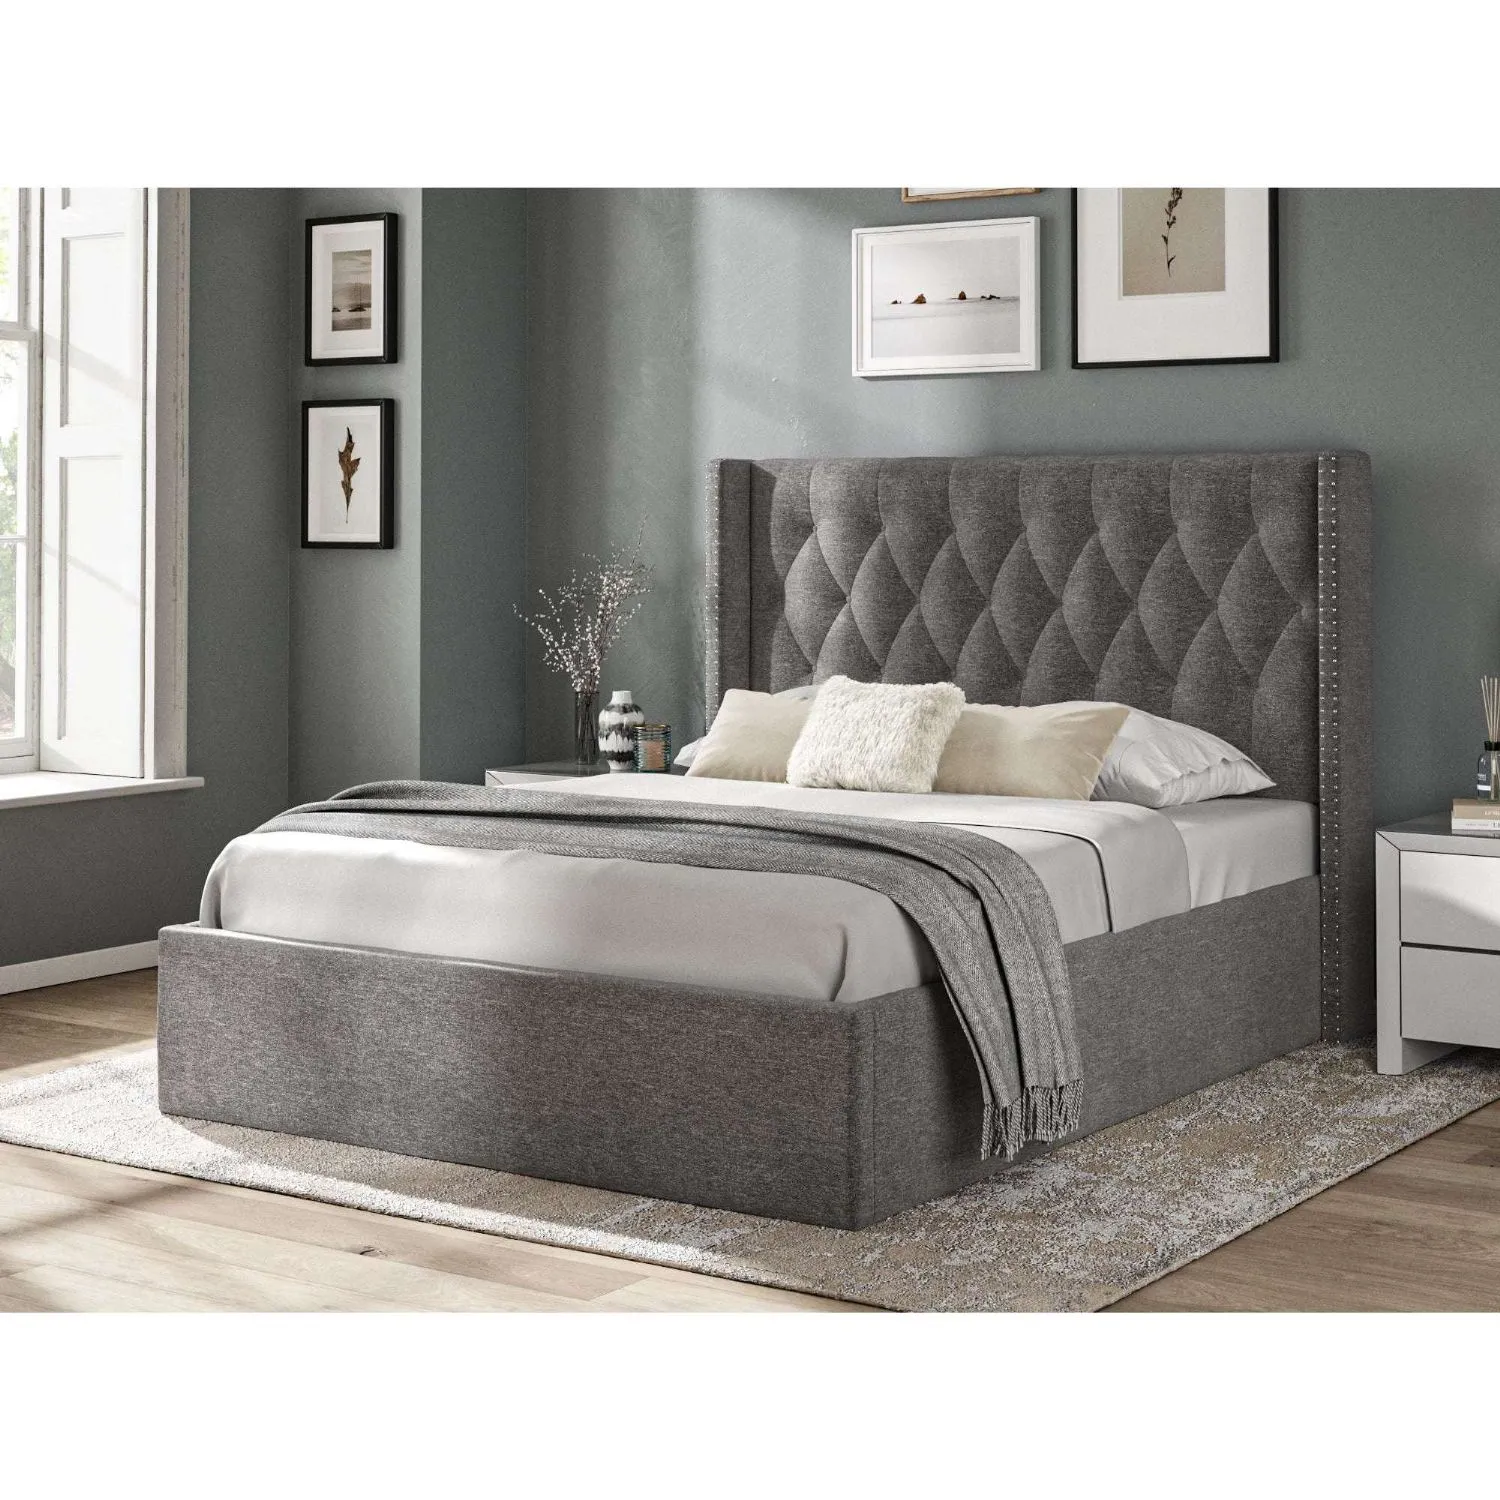 Fabric Bed Collection Dark Grey 5